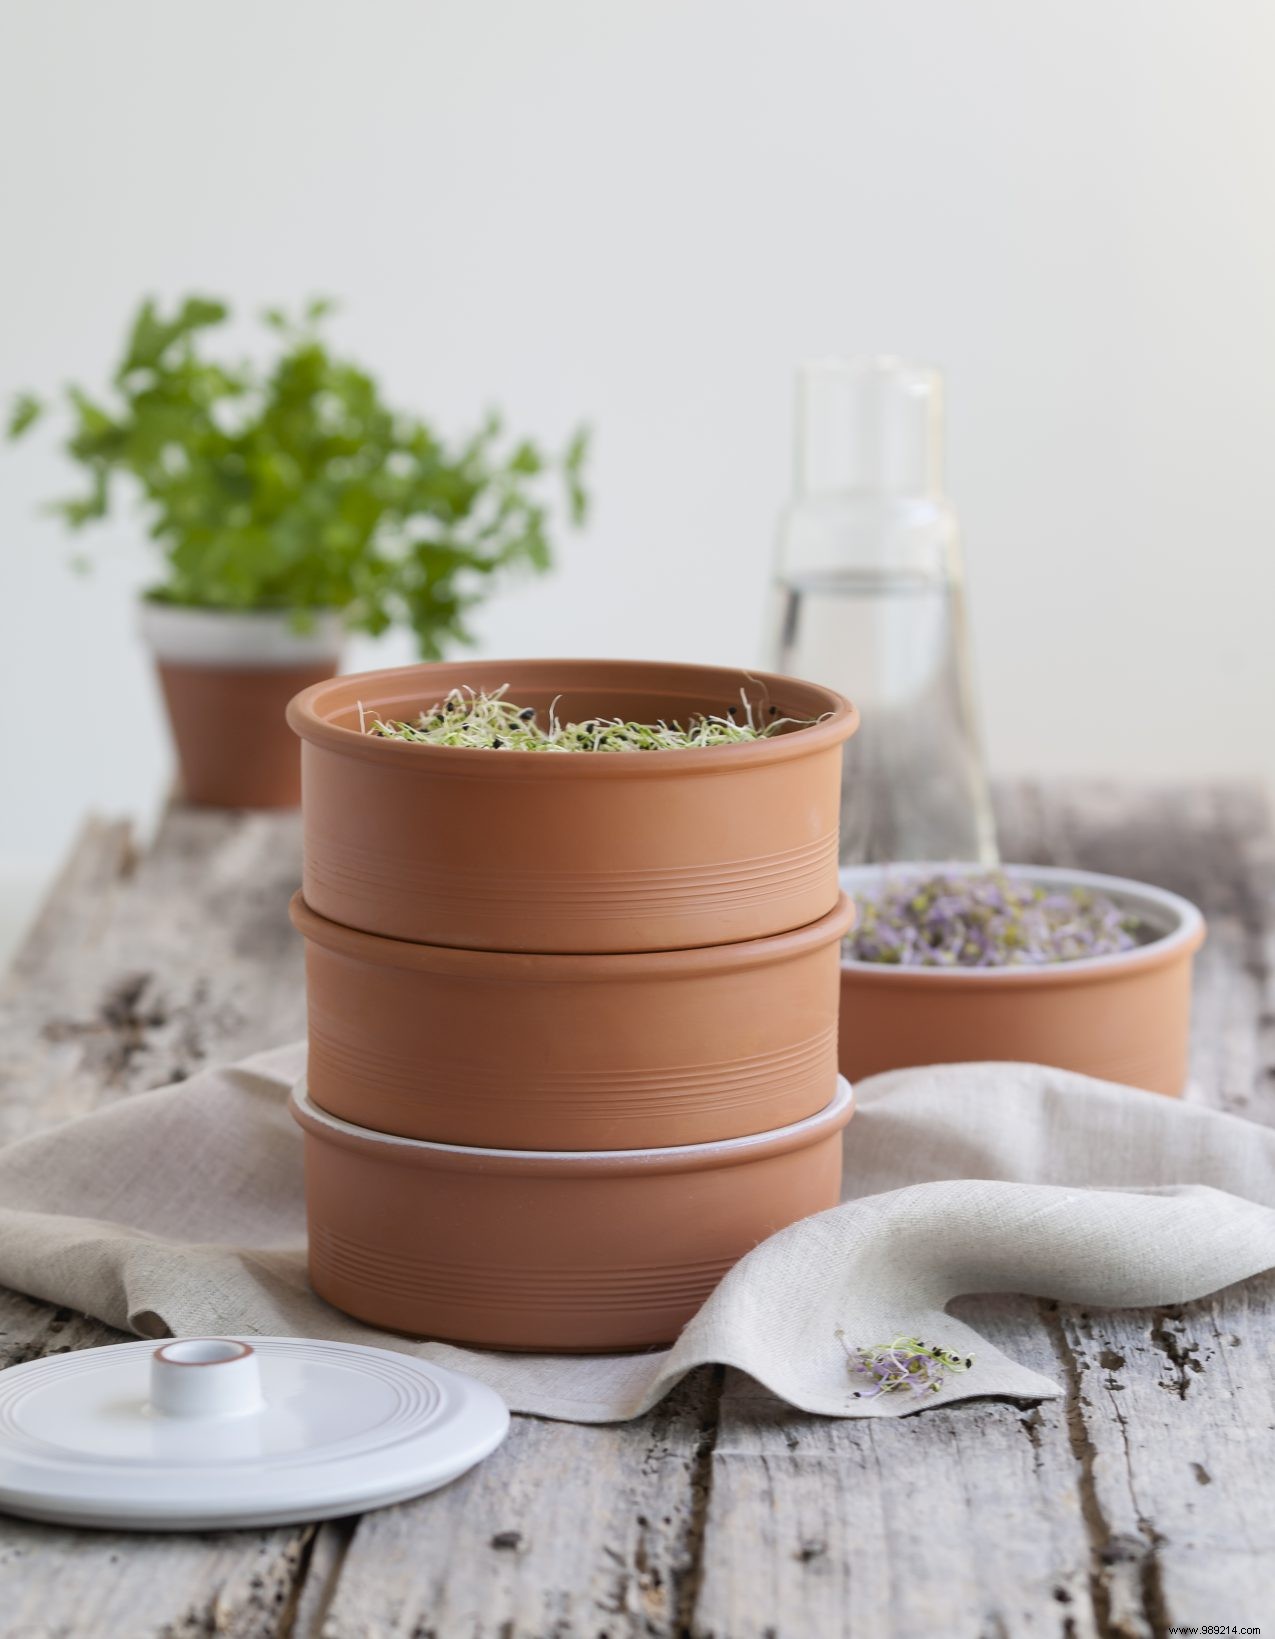 Seen in Santé:growing your own sprouts 